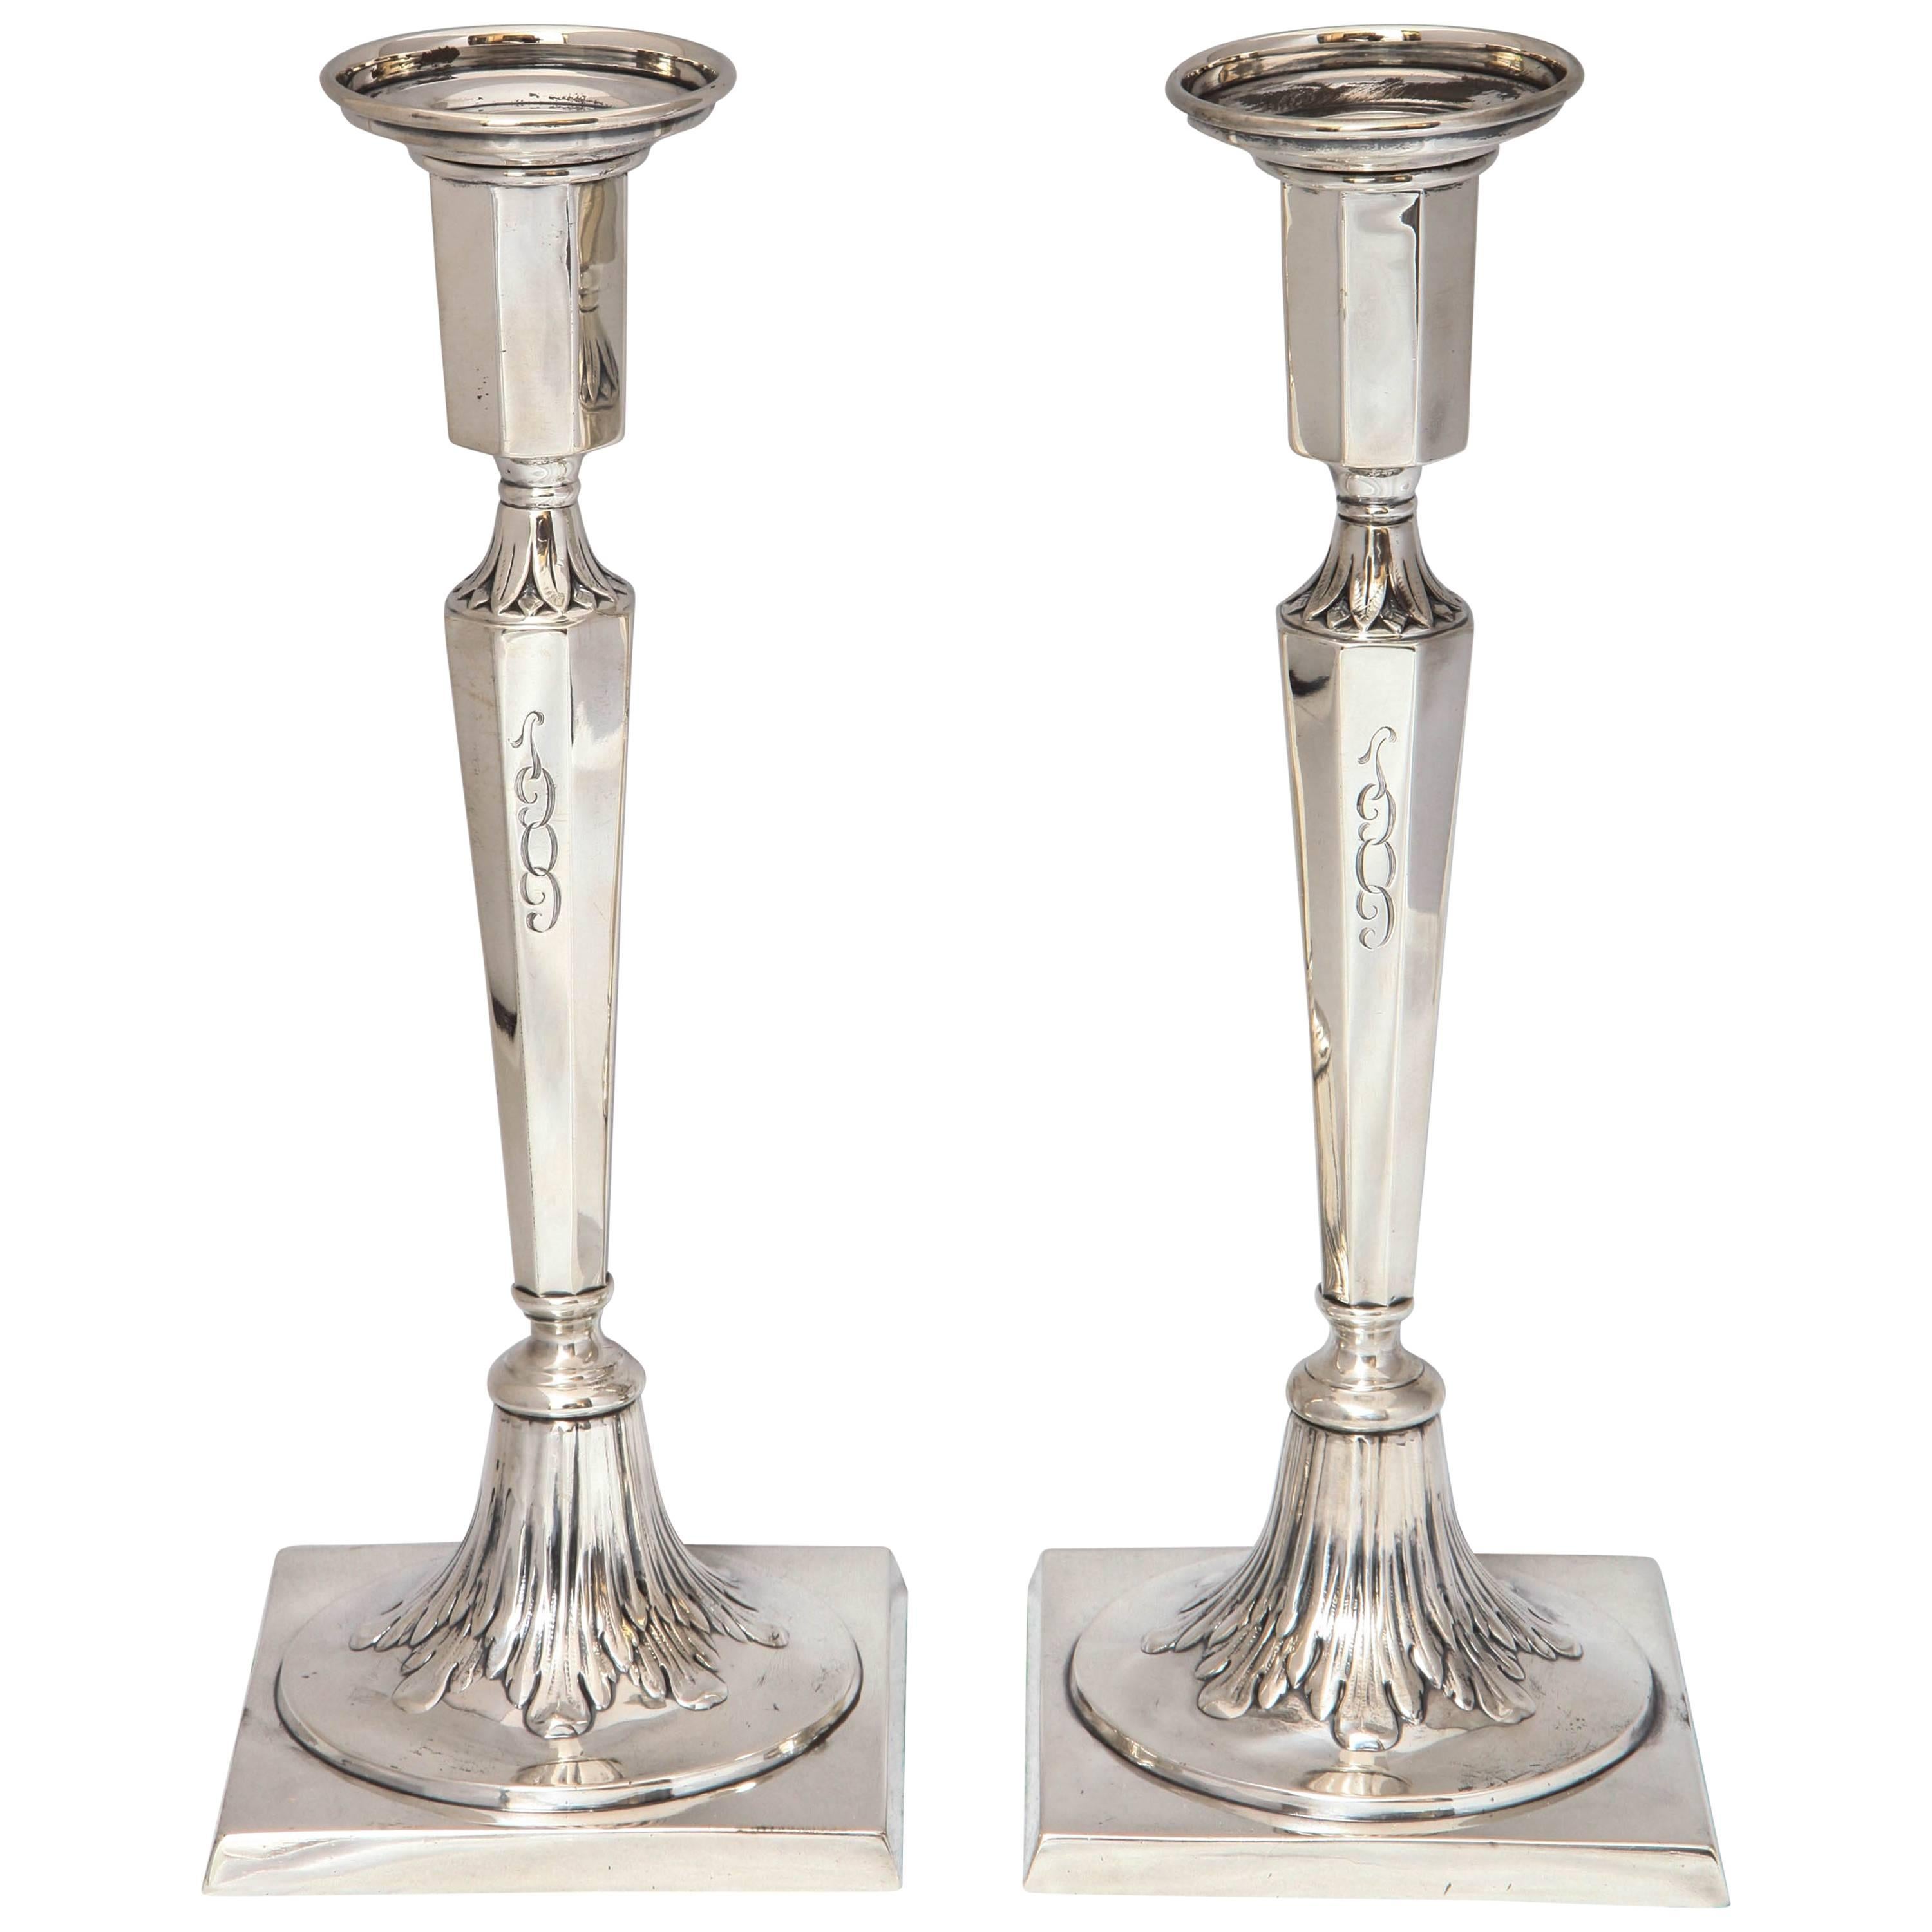 Pair of Sterling Silver Adams-Style Candlesticks